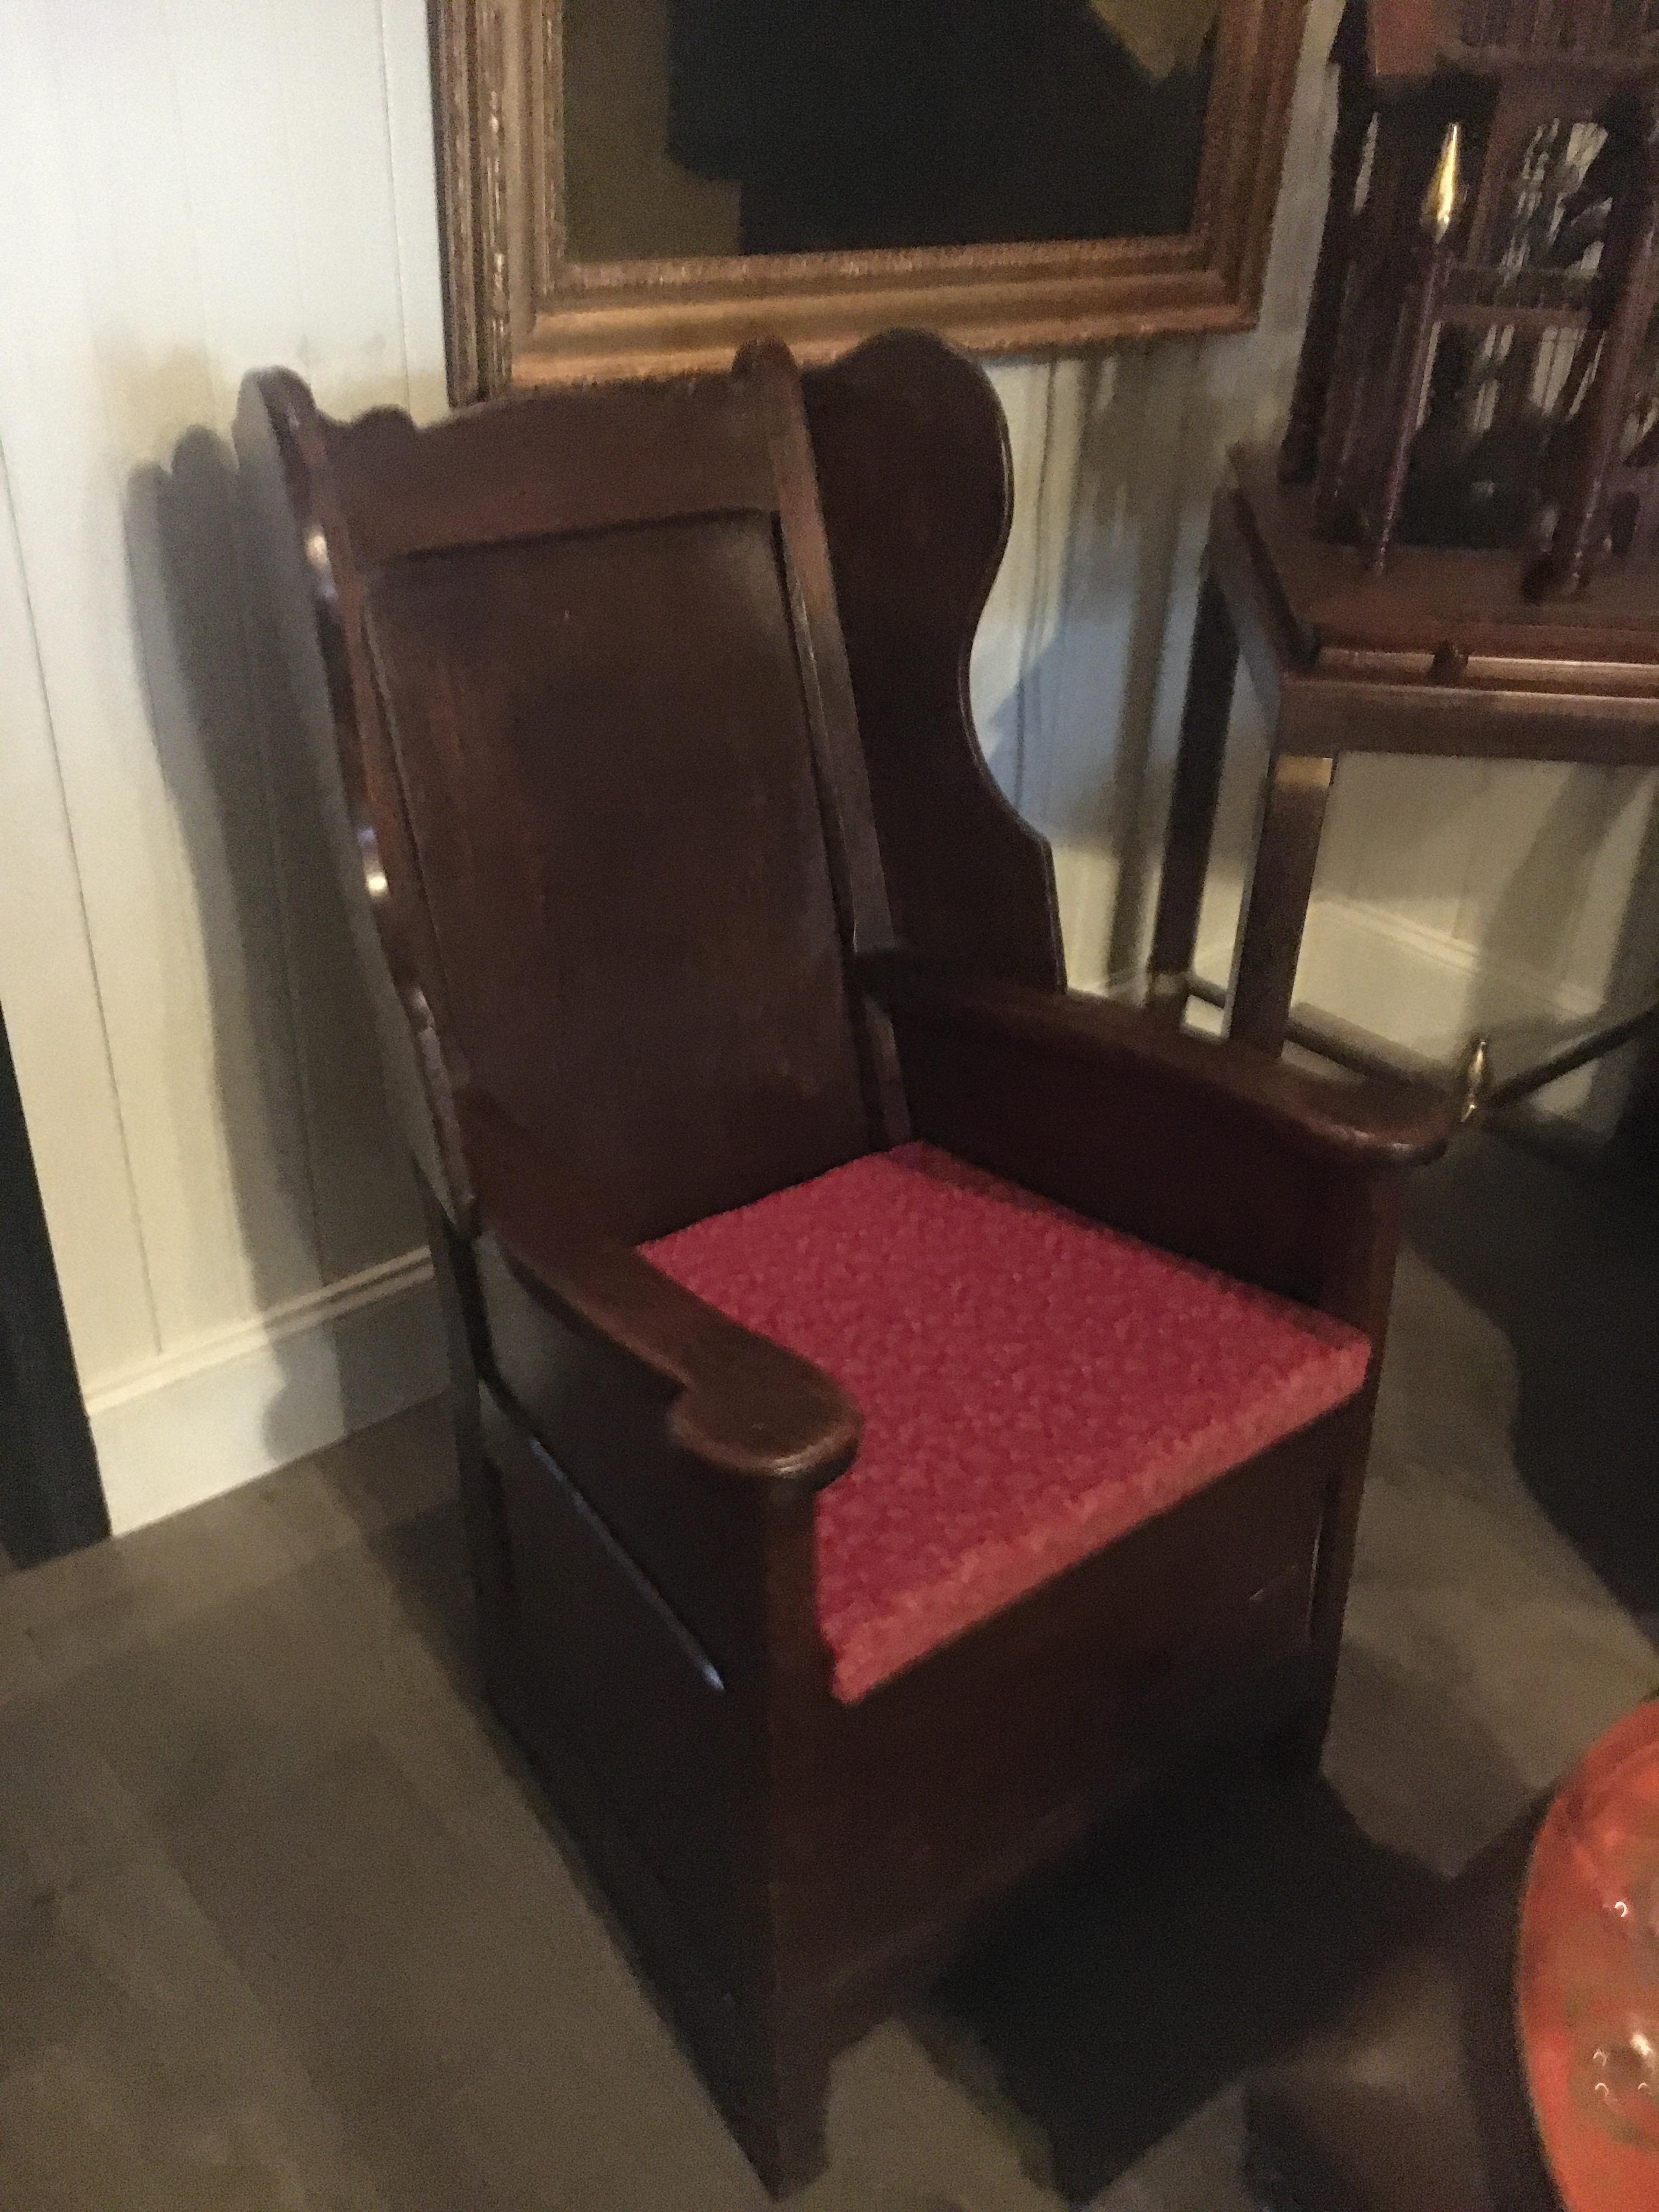 An 18th century lambing chair, great color and patination, nice accent piece or captains chair.
Measures: 43.5